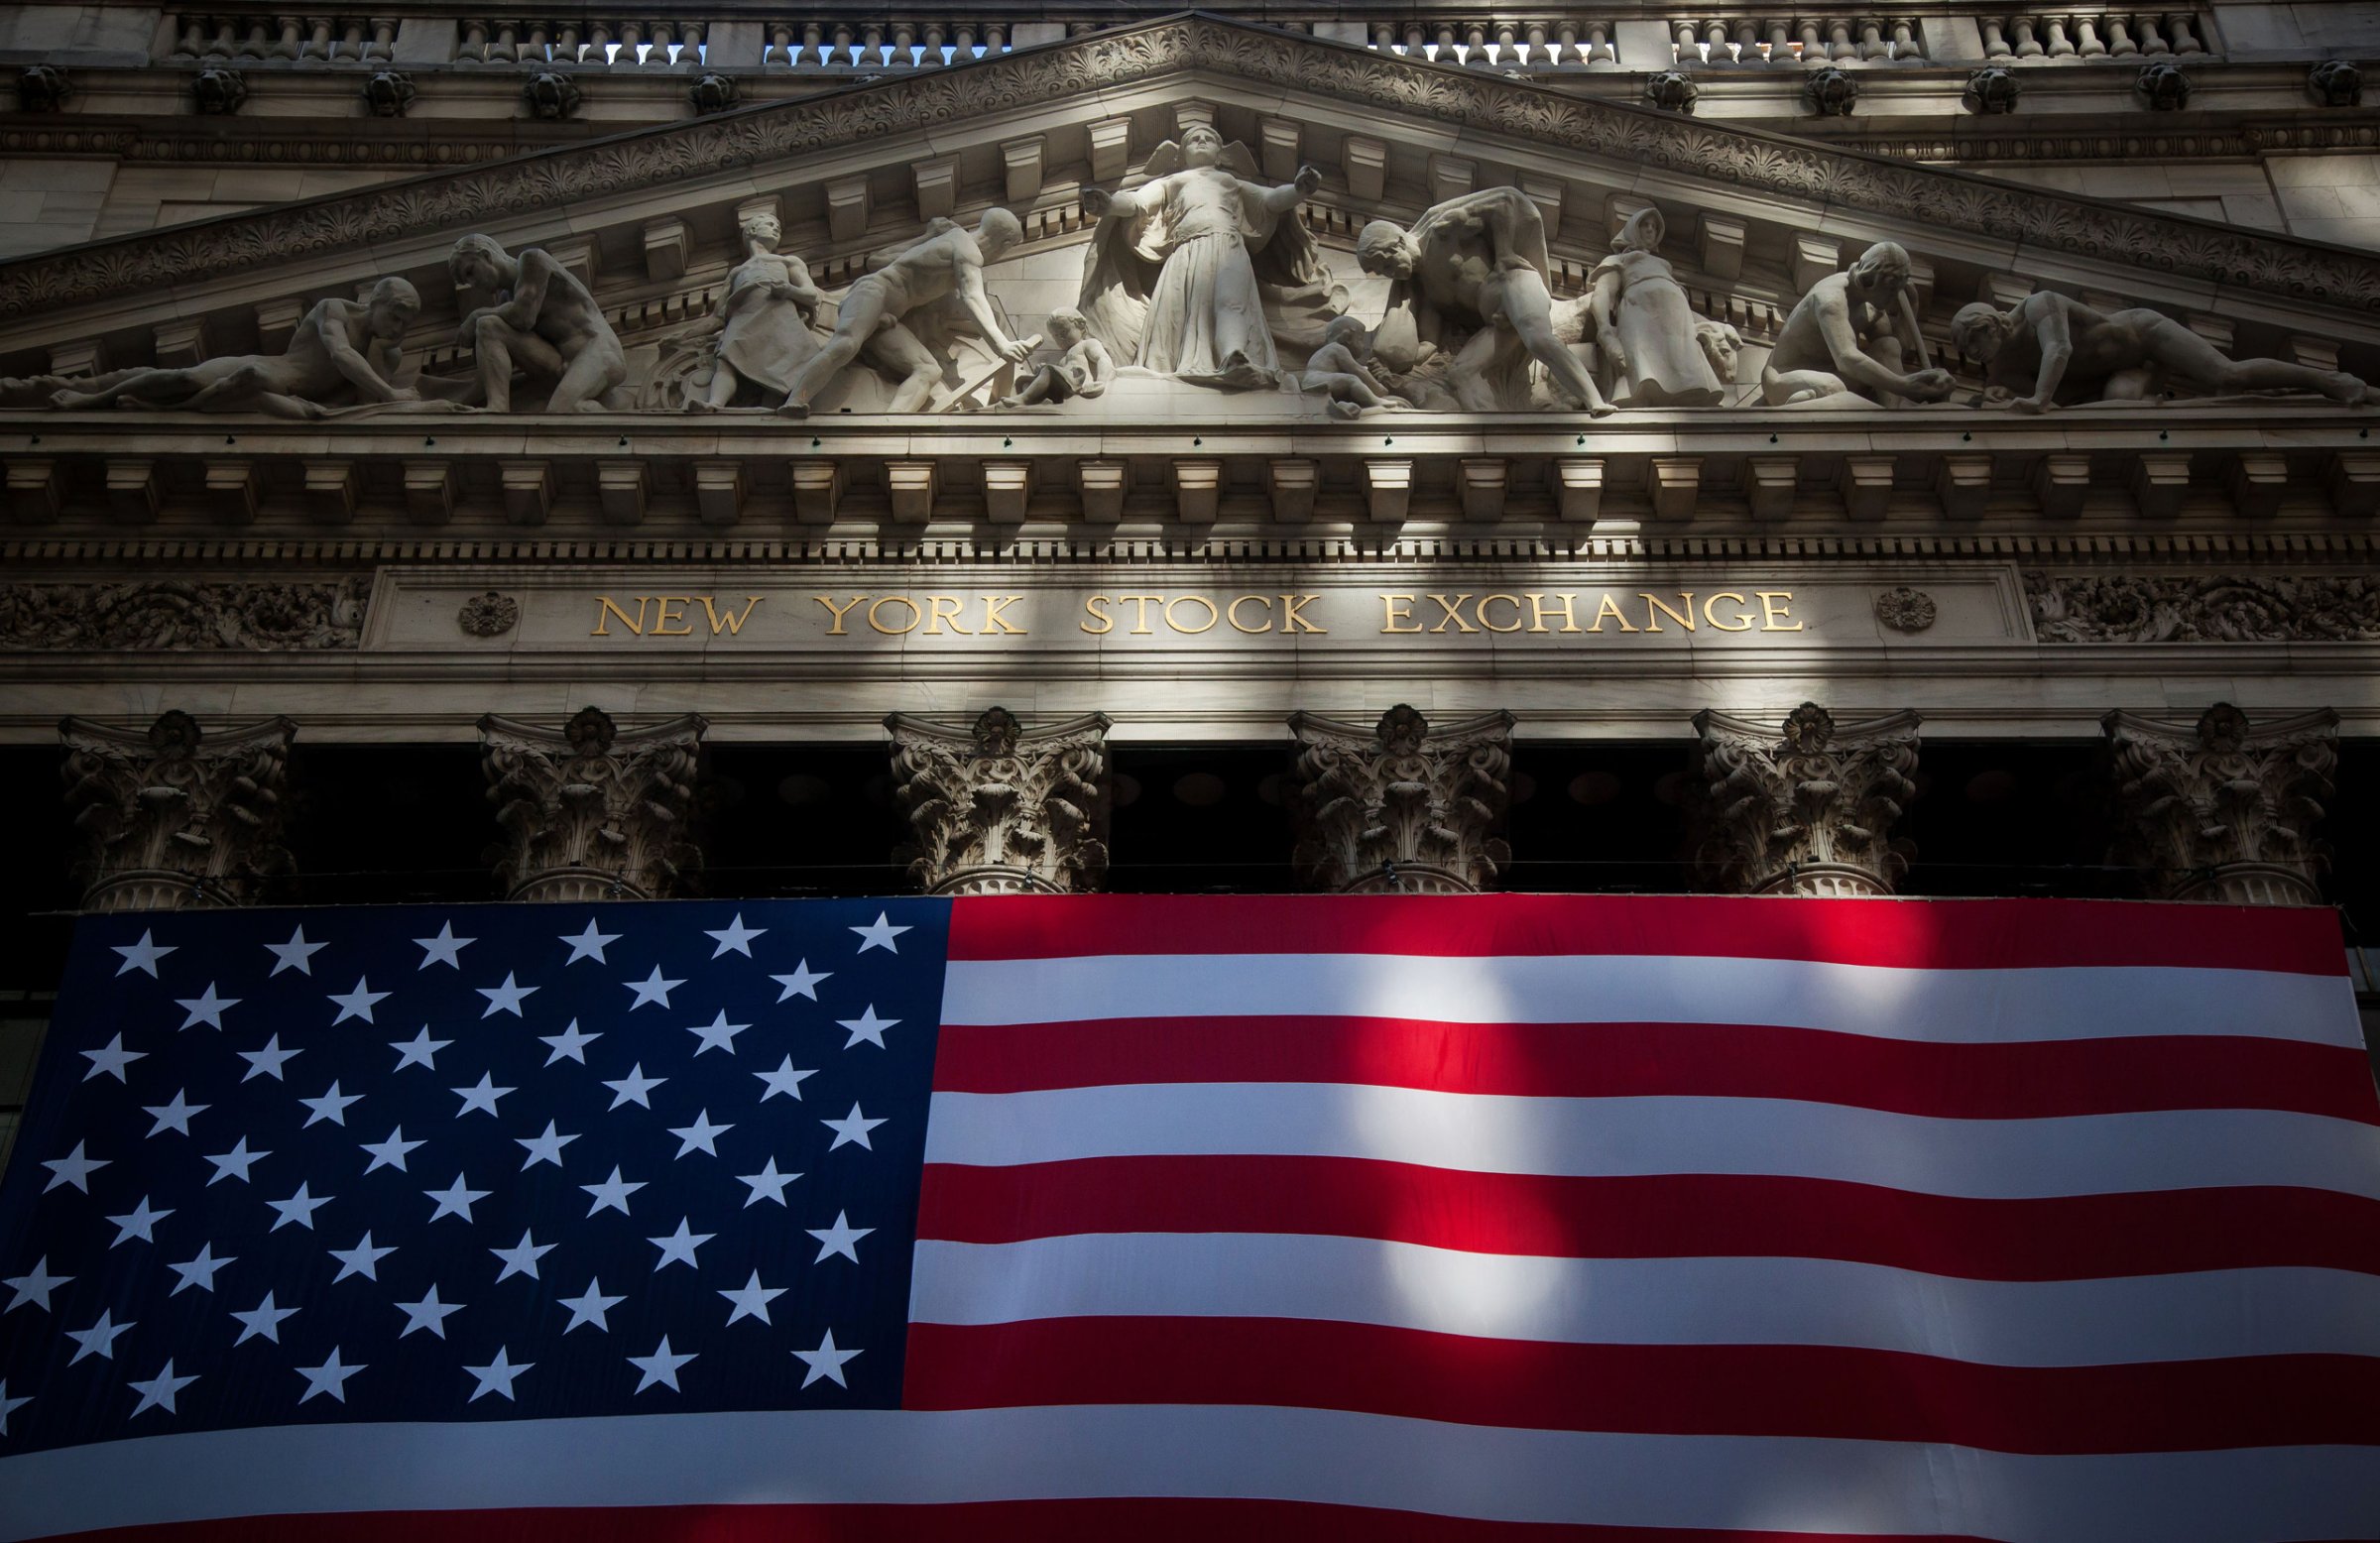 An American flag is displayed at the New York Stock Exchange (NYSE) in New York, U.S., on Nov. 11, 2016.